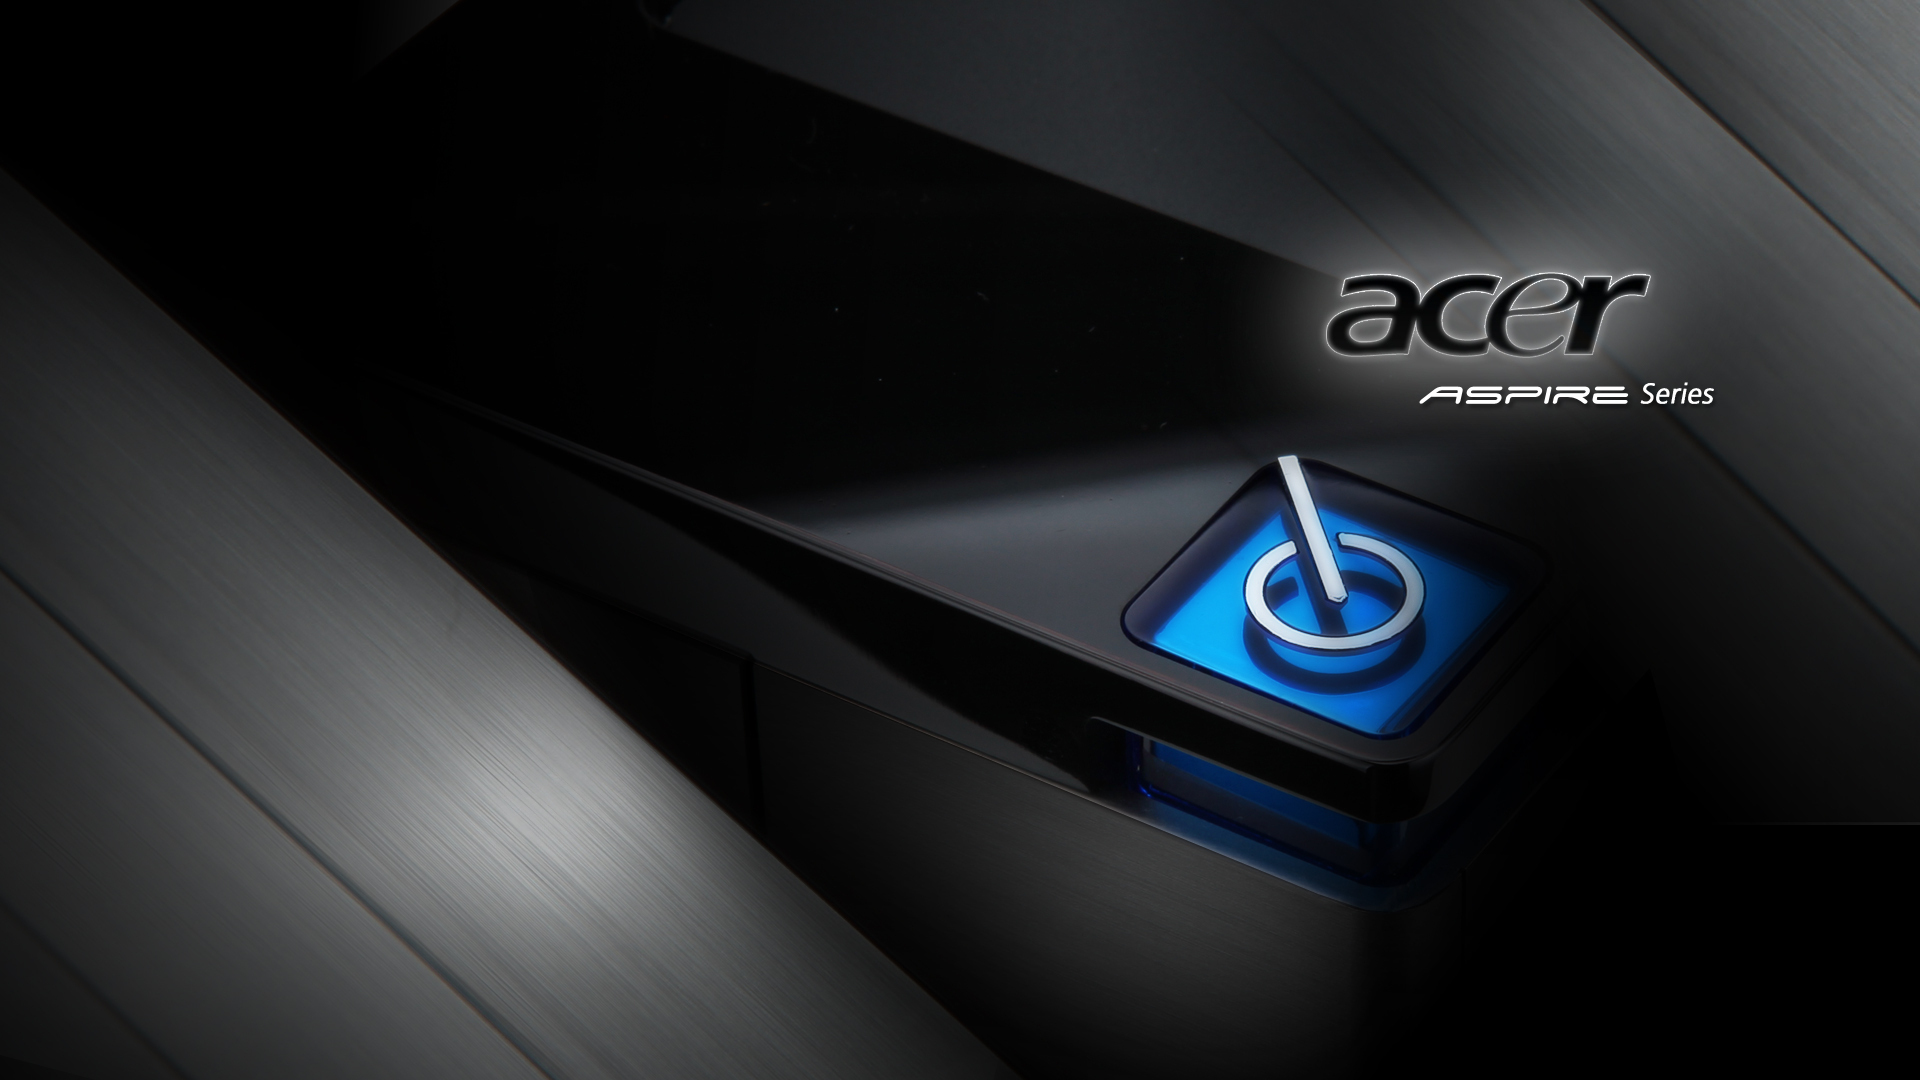 Acer Aspire Blue   Computers Wallpapers Best HD Wallpapers Photos